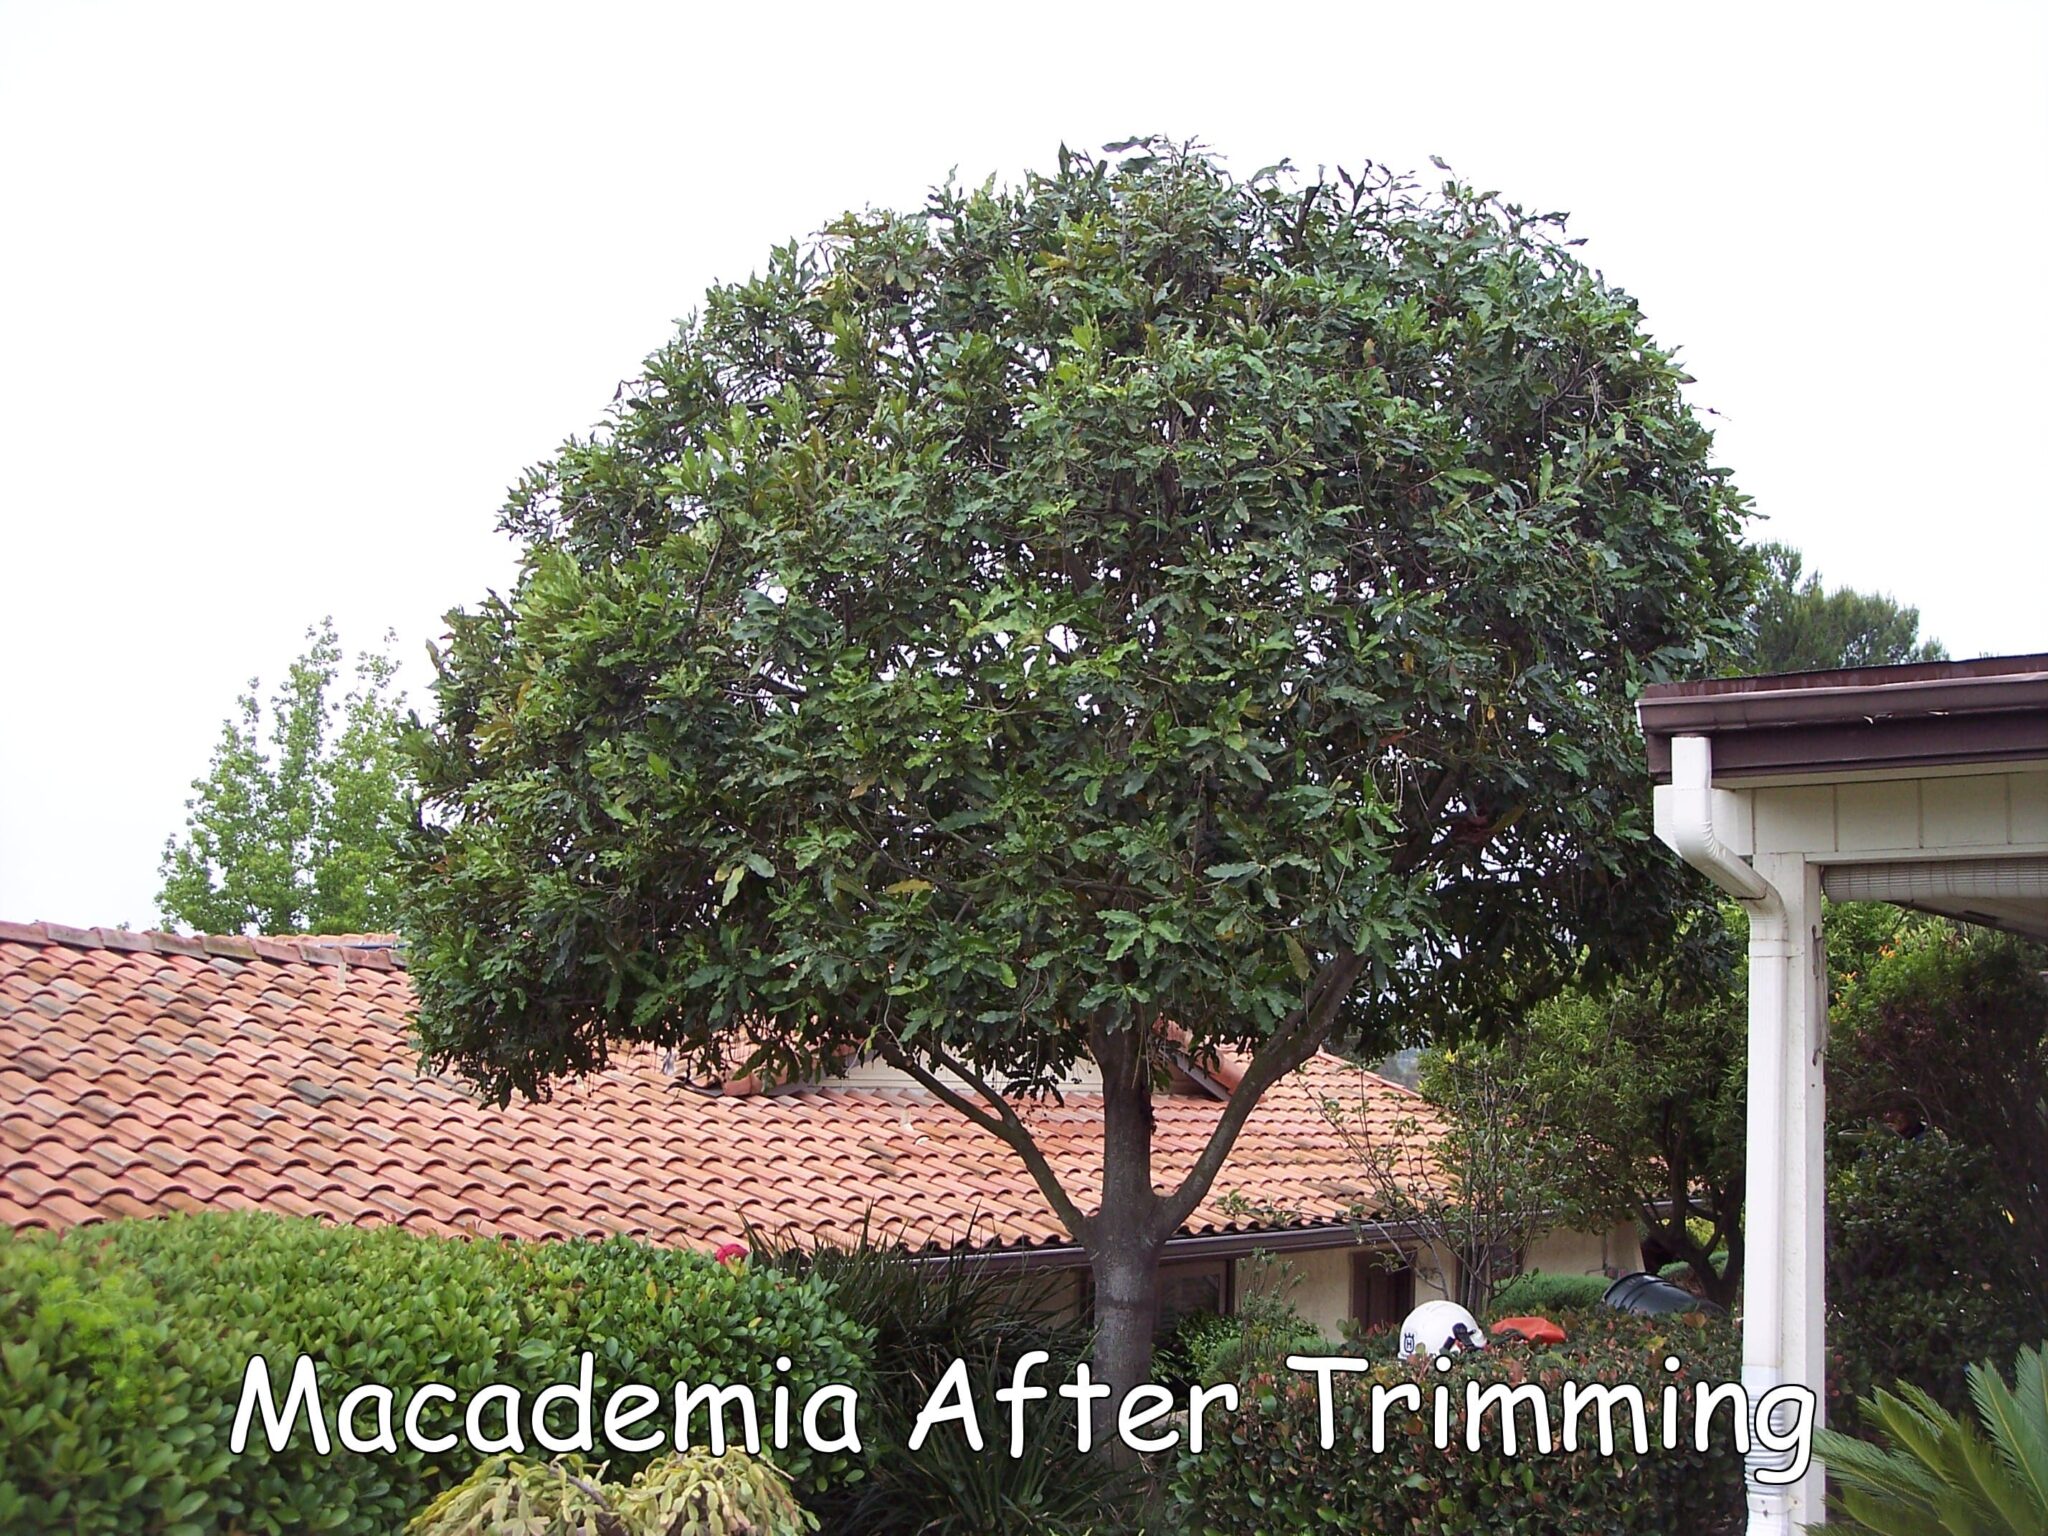 Macademia after trimming